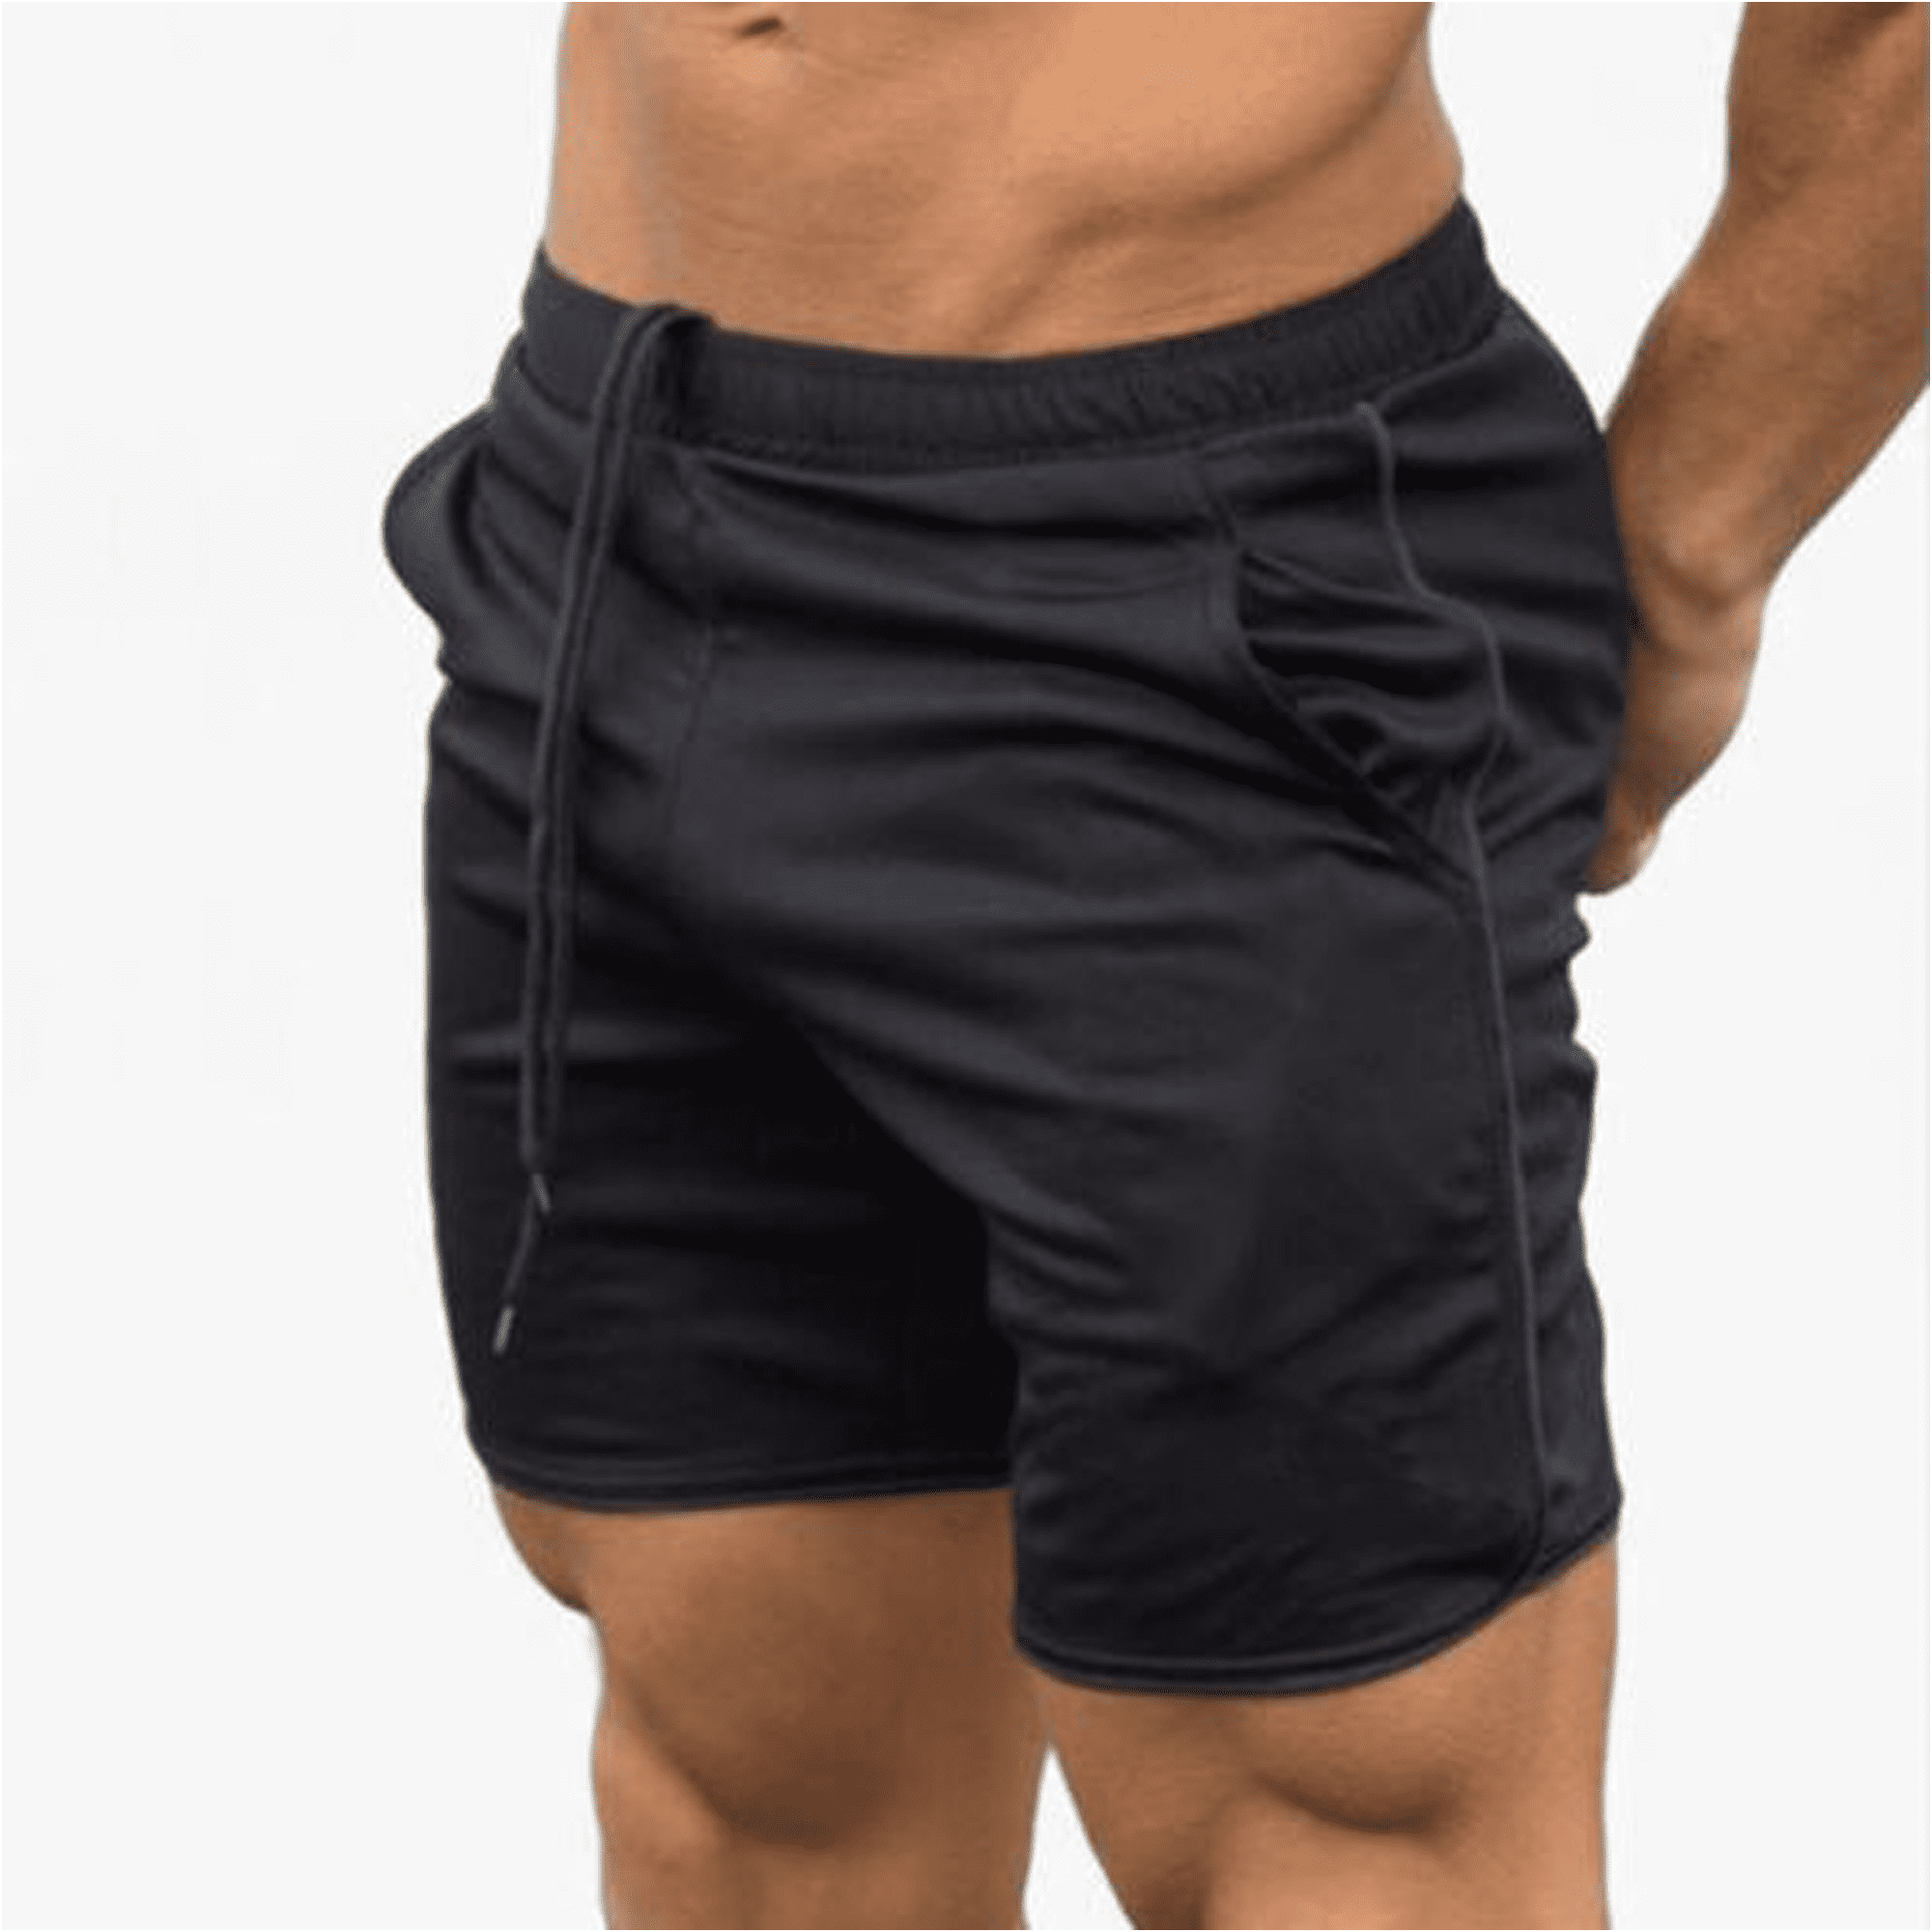 Men/'s GYM Shorts Training Running Sport Workout Casual Jogging Pants Trousers